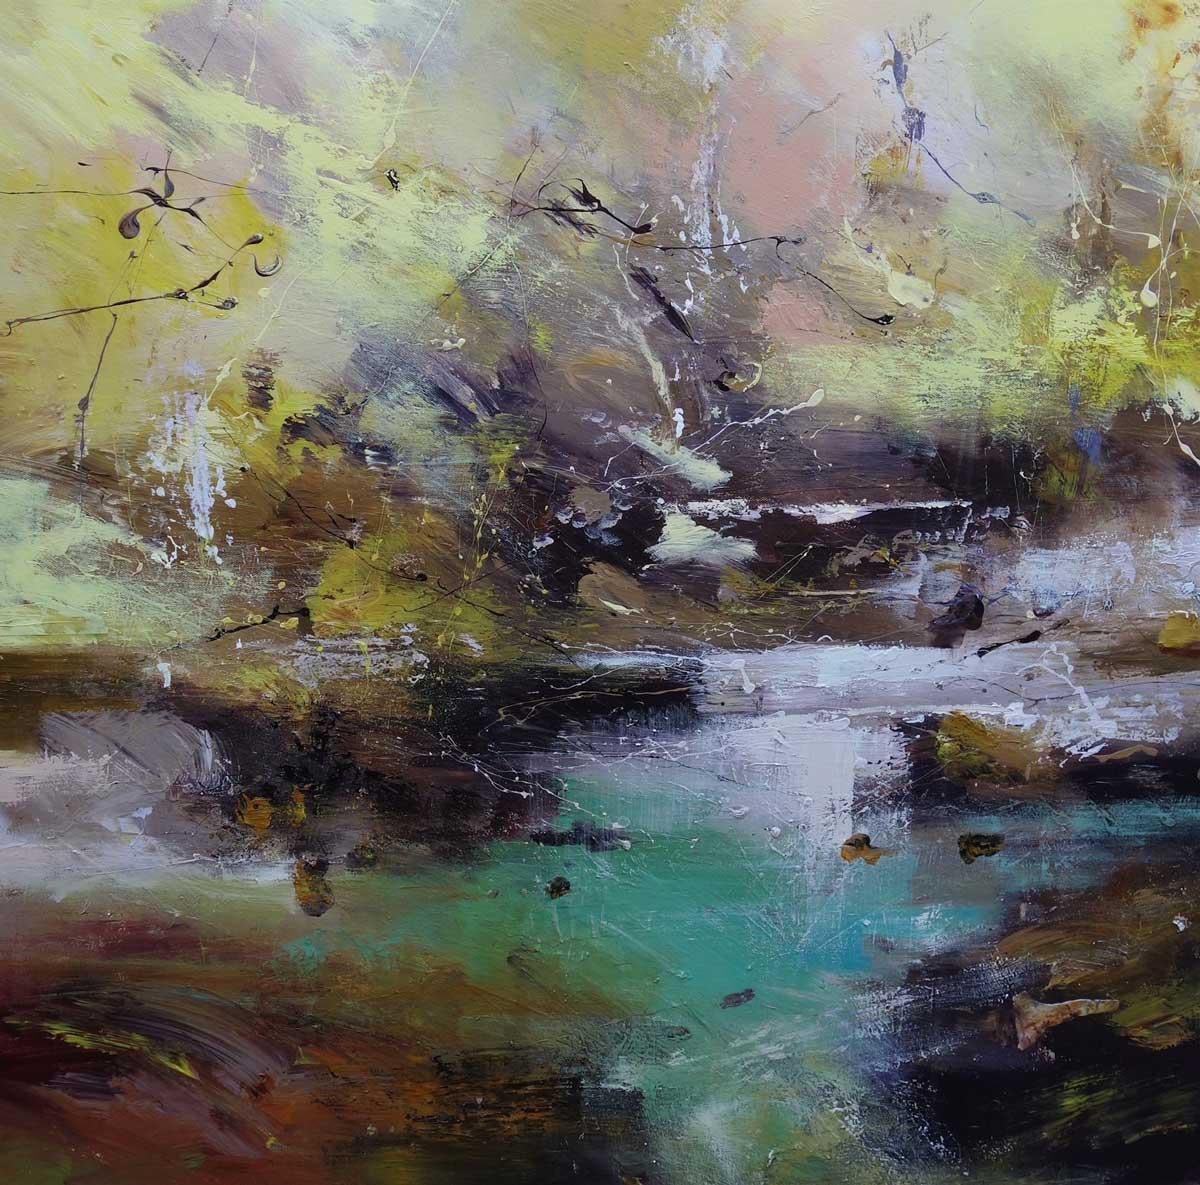 Claire Wiltsher Landscape Painting - Ripples Under the Surface - Contemporary British Landscape: Oil Paint on Canvas